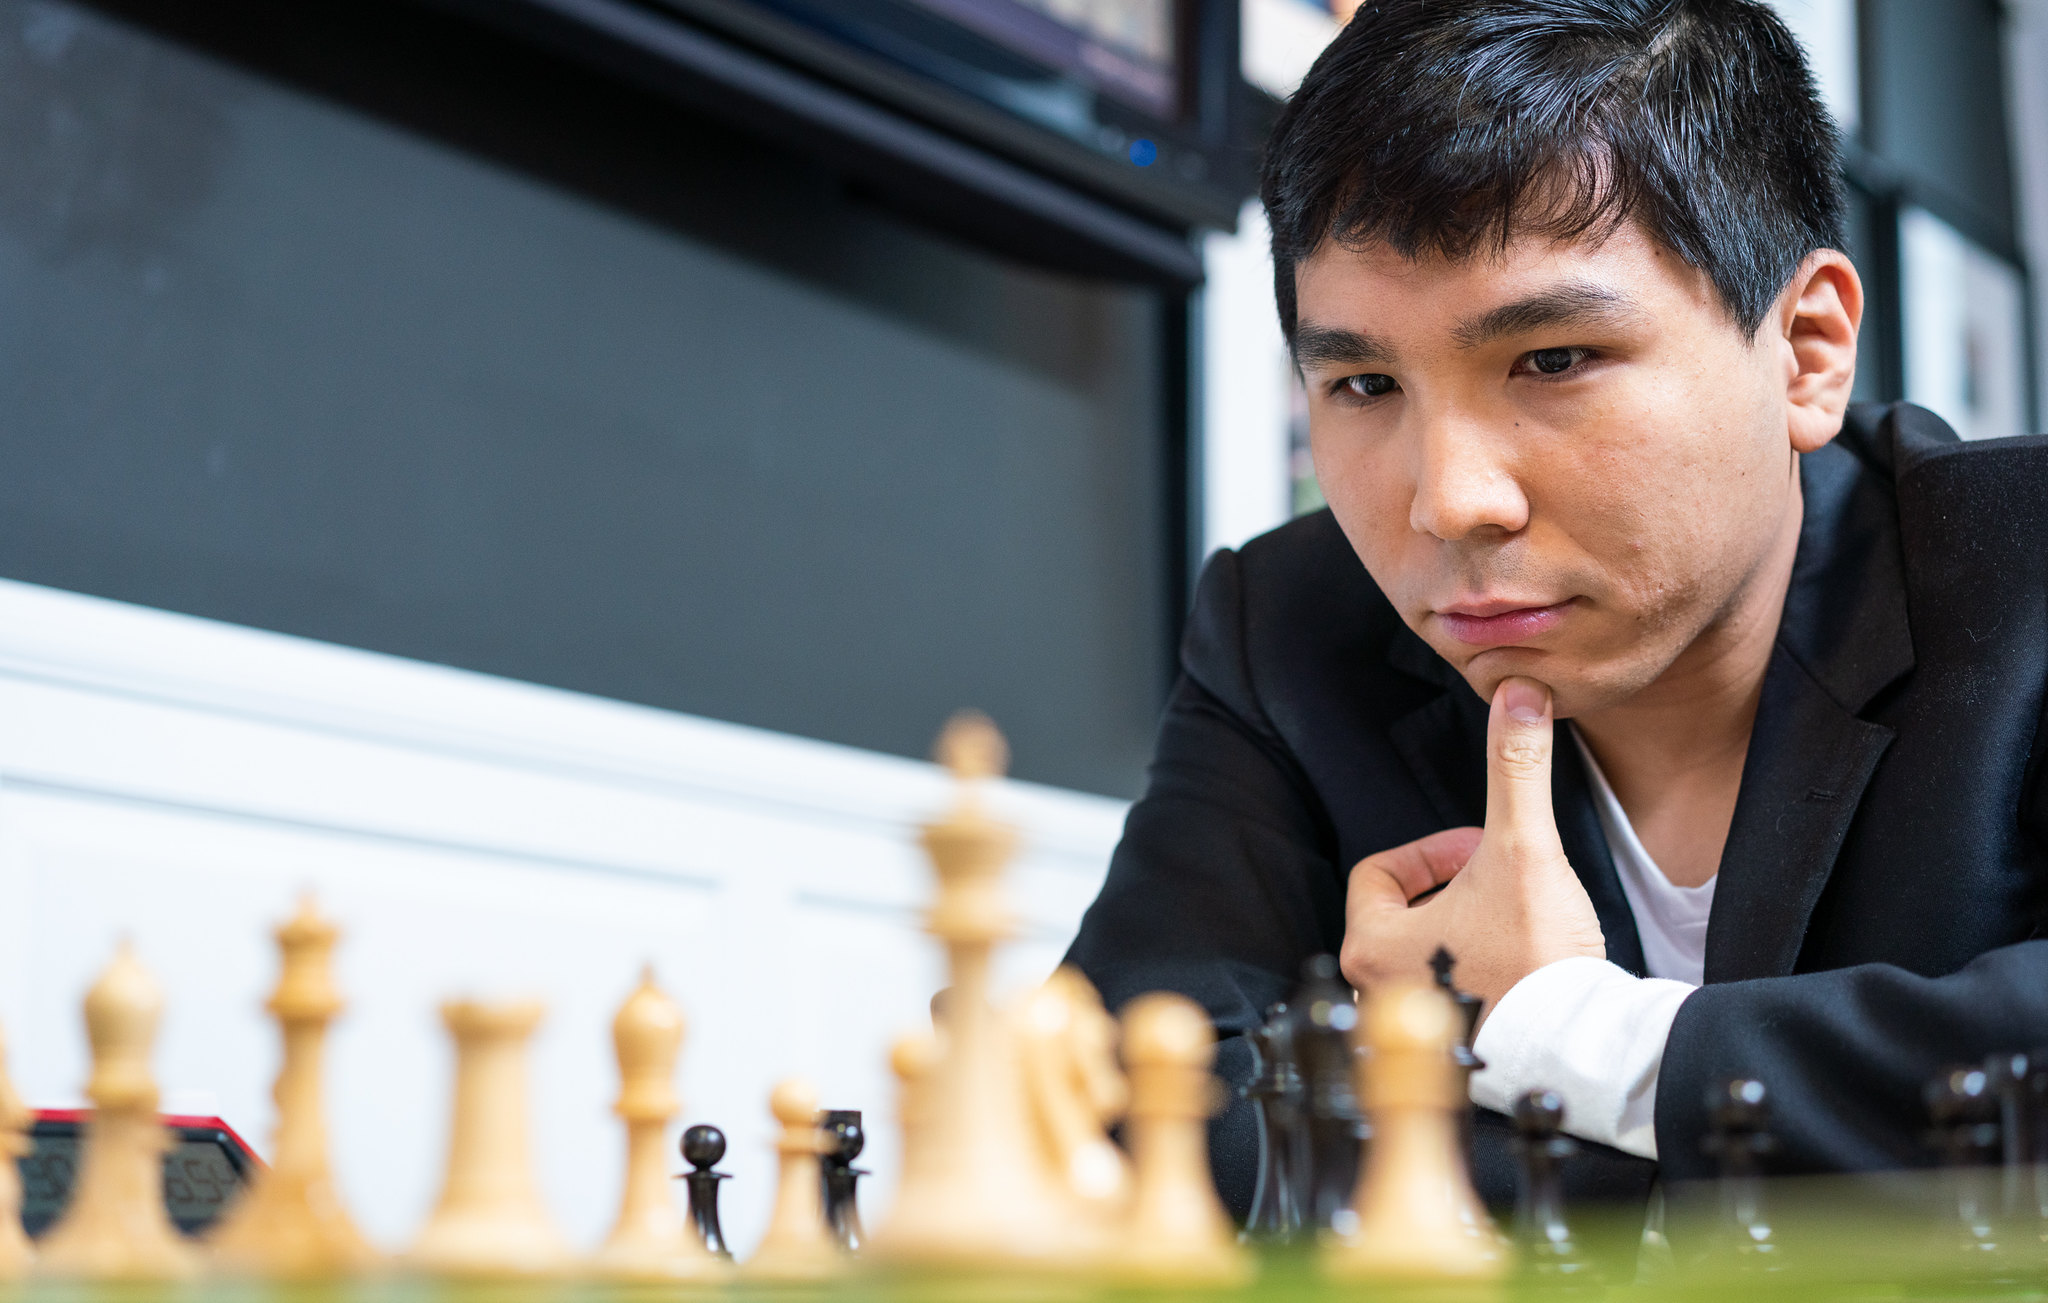 chess24 - Just when Wesley So again looked in danger of